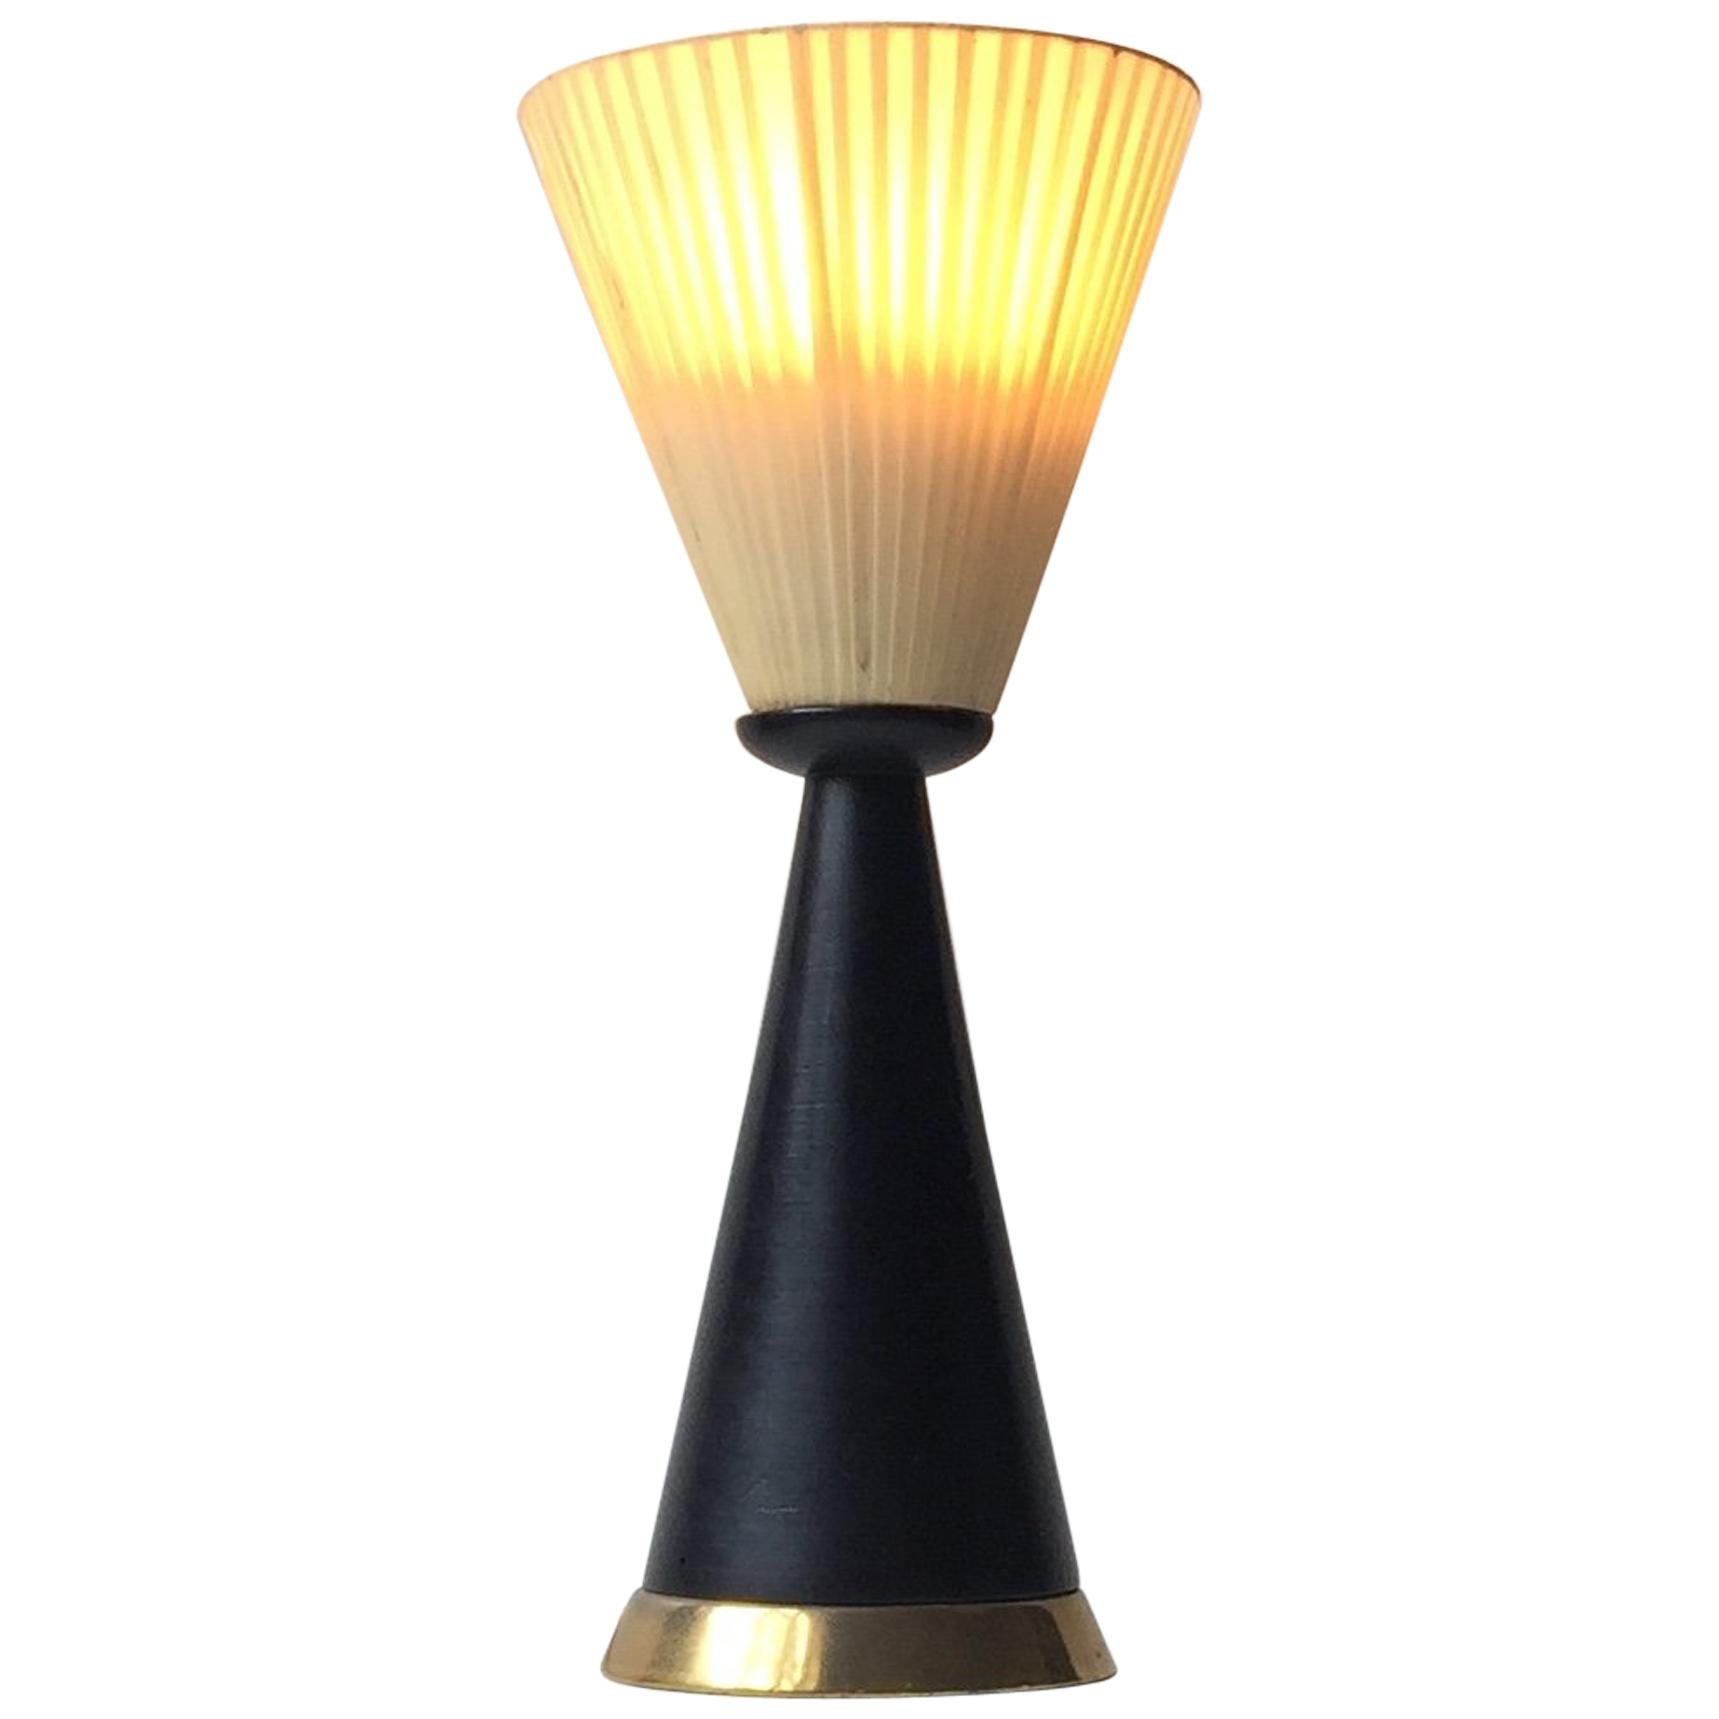 Italian Modern Diablo Table Lamp with Brass Accents, 1960s